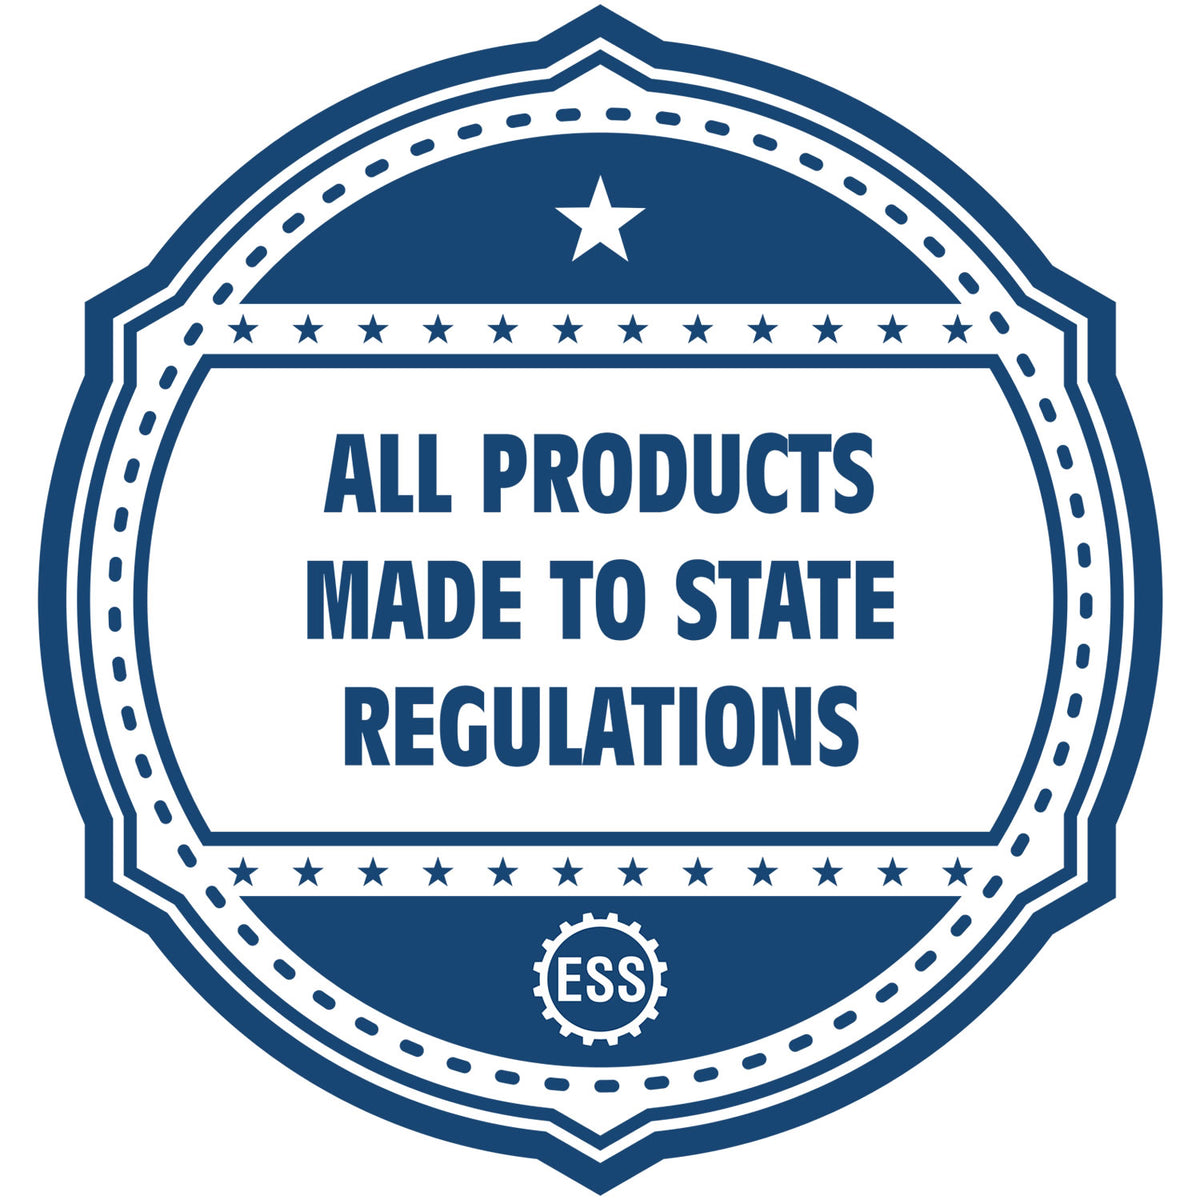 An icon or badge element for the District of Columbia Engineer Desk Seal showing that this product is made in compliance with state regulations.